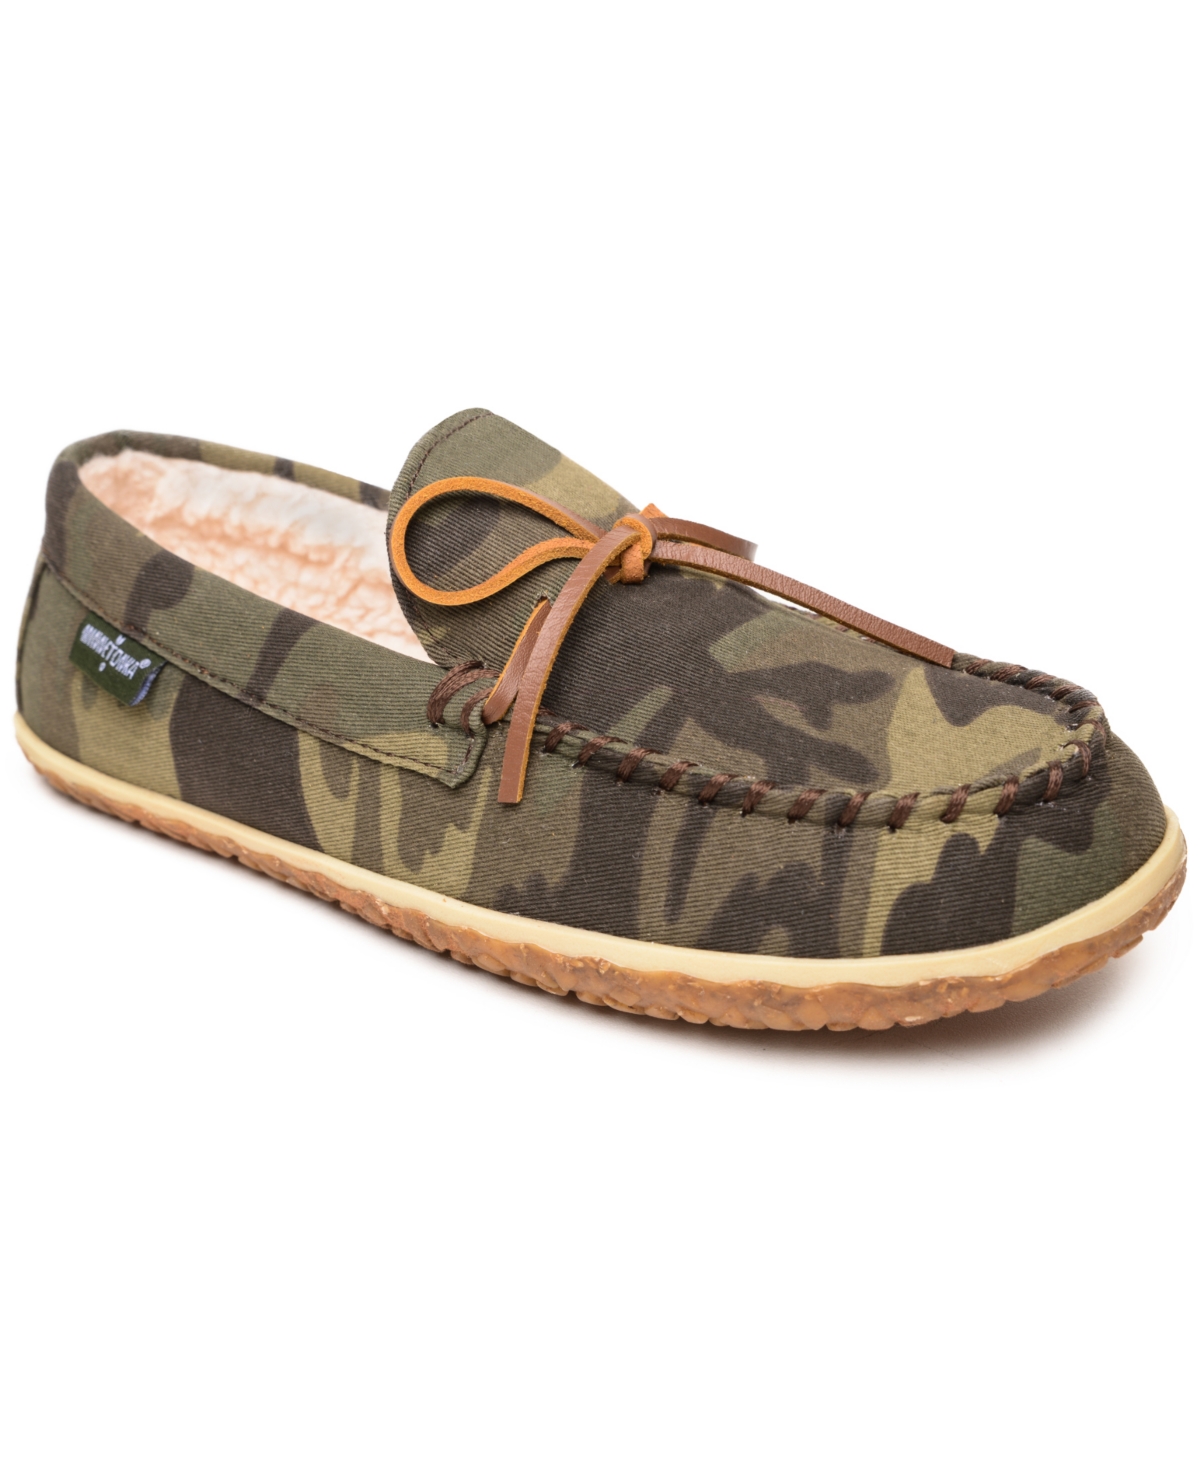 Men's Tomm Moccasin Slippers - Green Camo Print